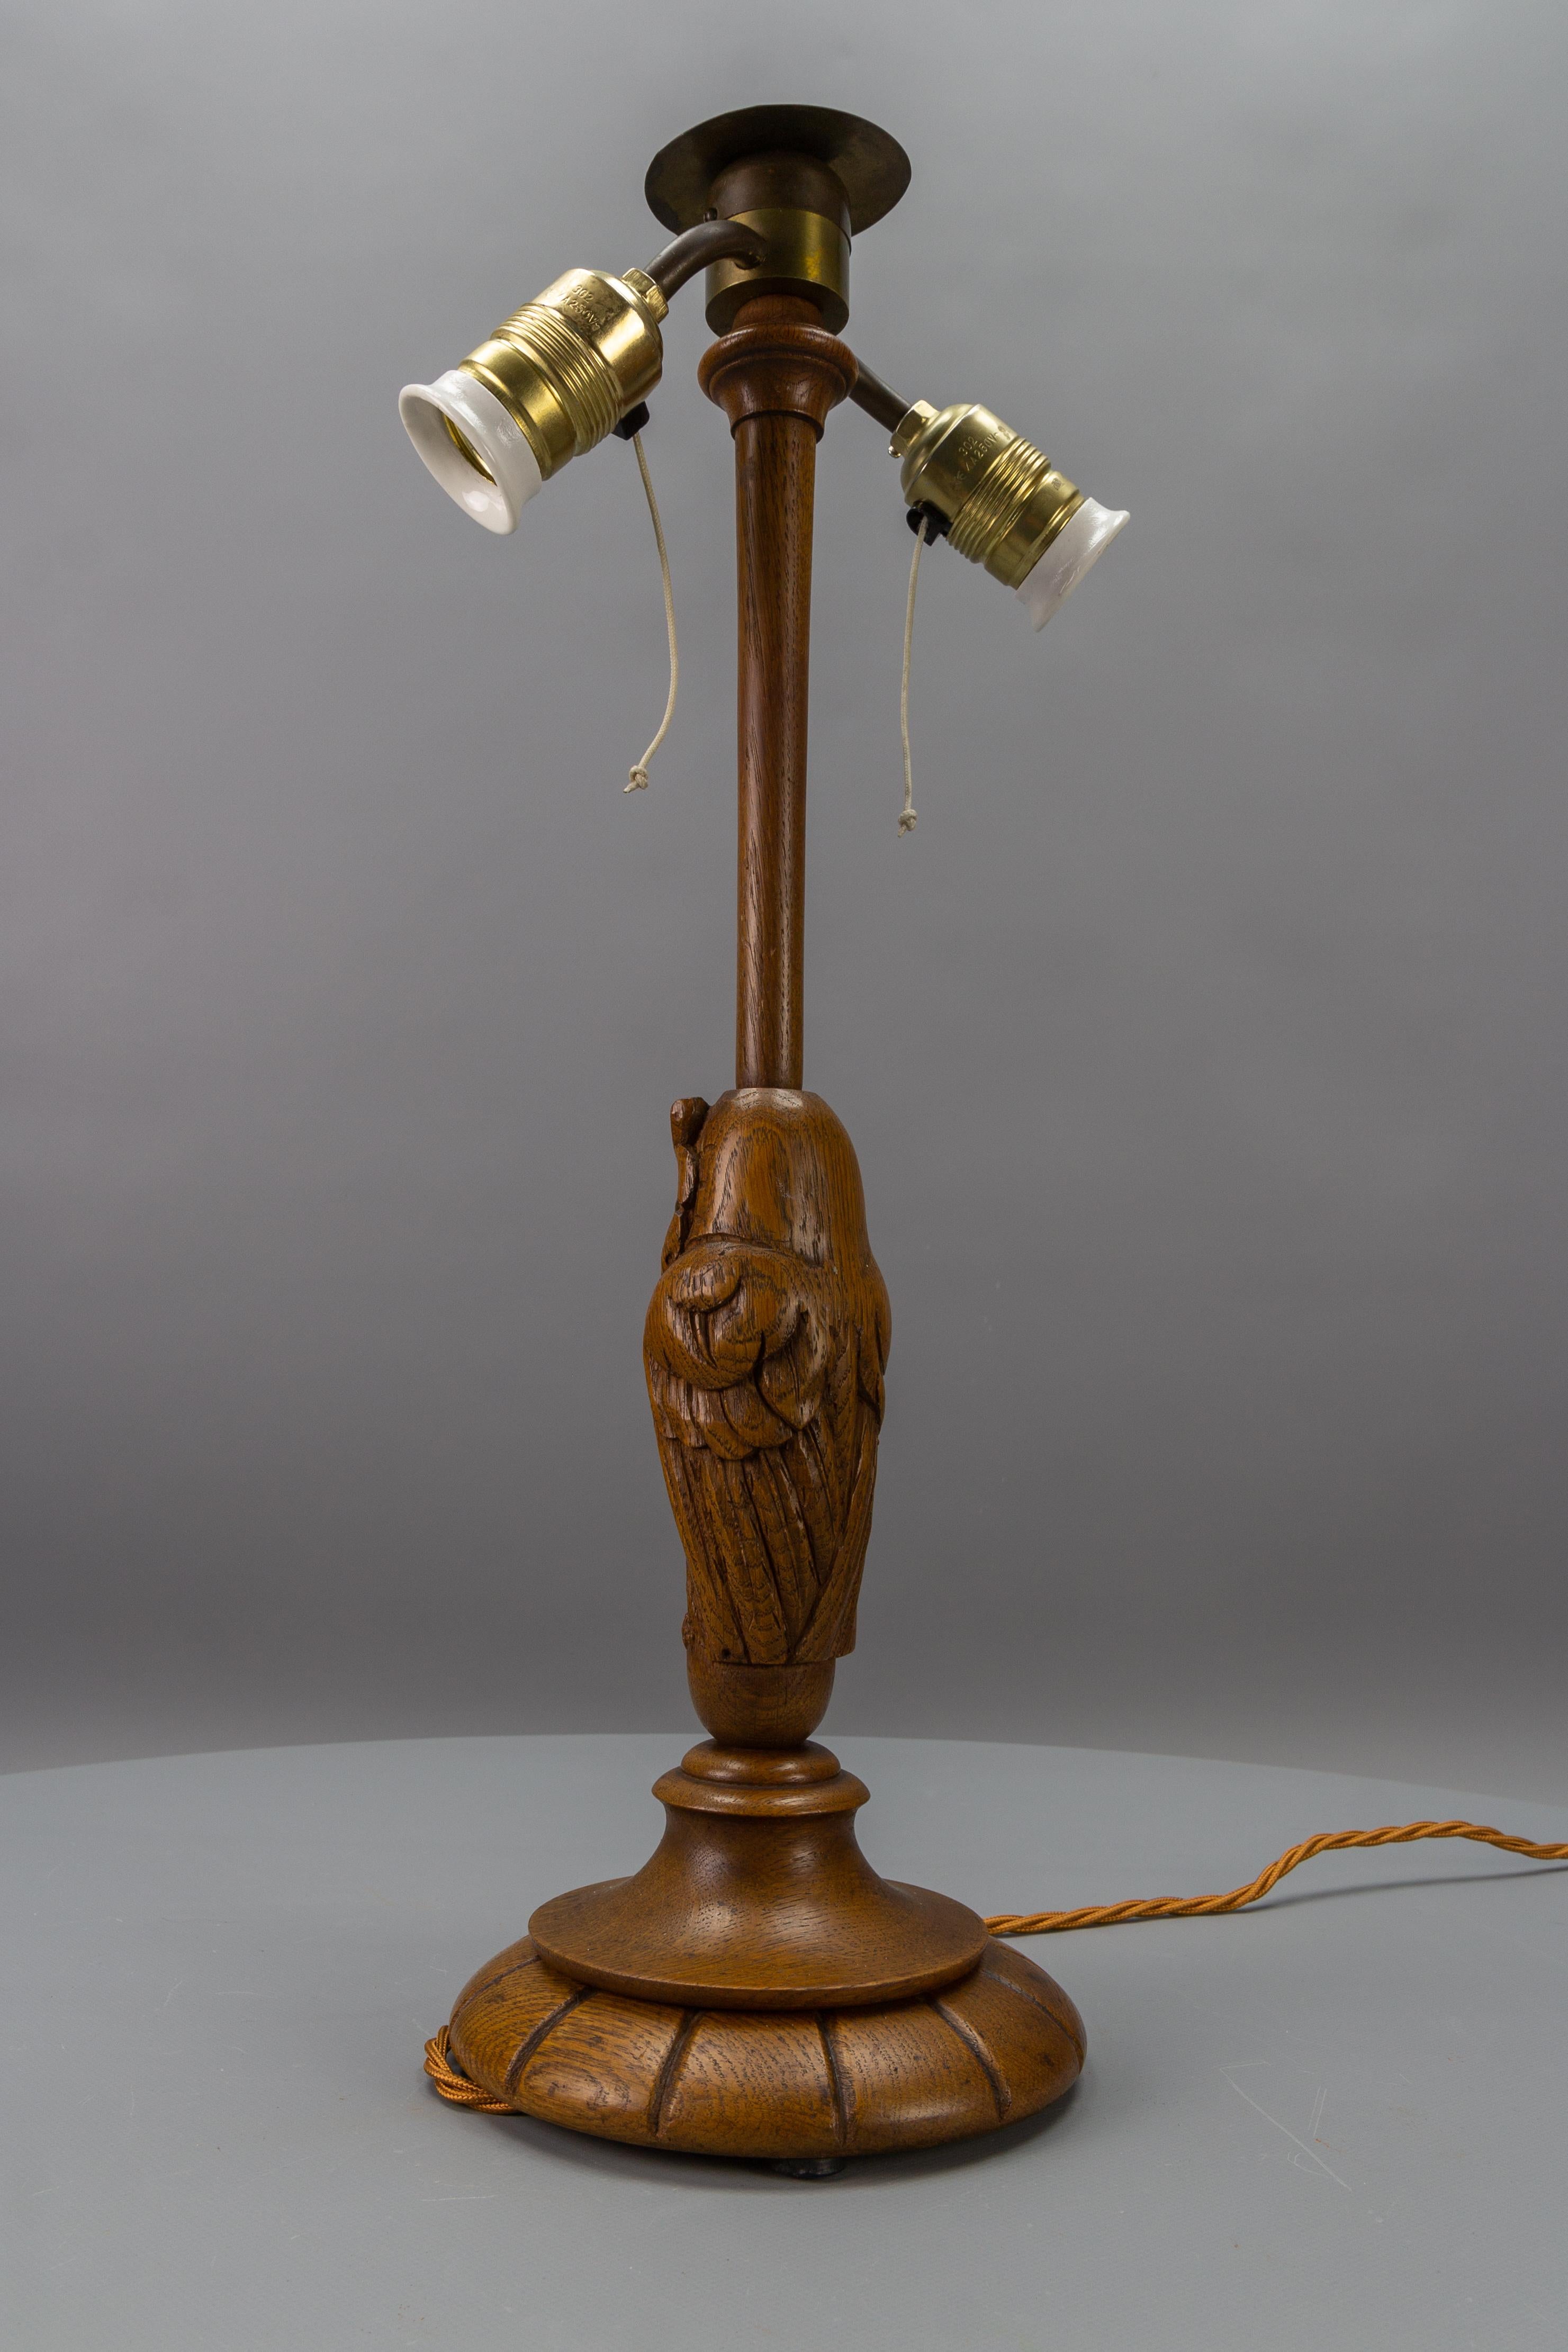 Antique Art Deco Two-Light Owl Sculpture Table or Desk Lamp  Germany, ca. 1920 For Sale 2